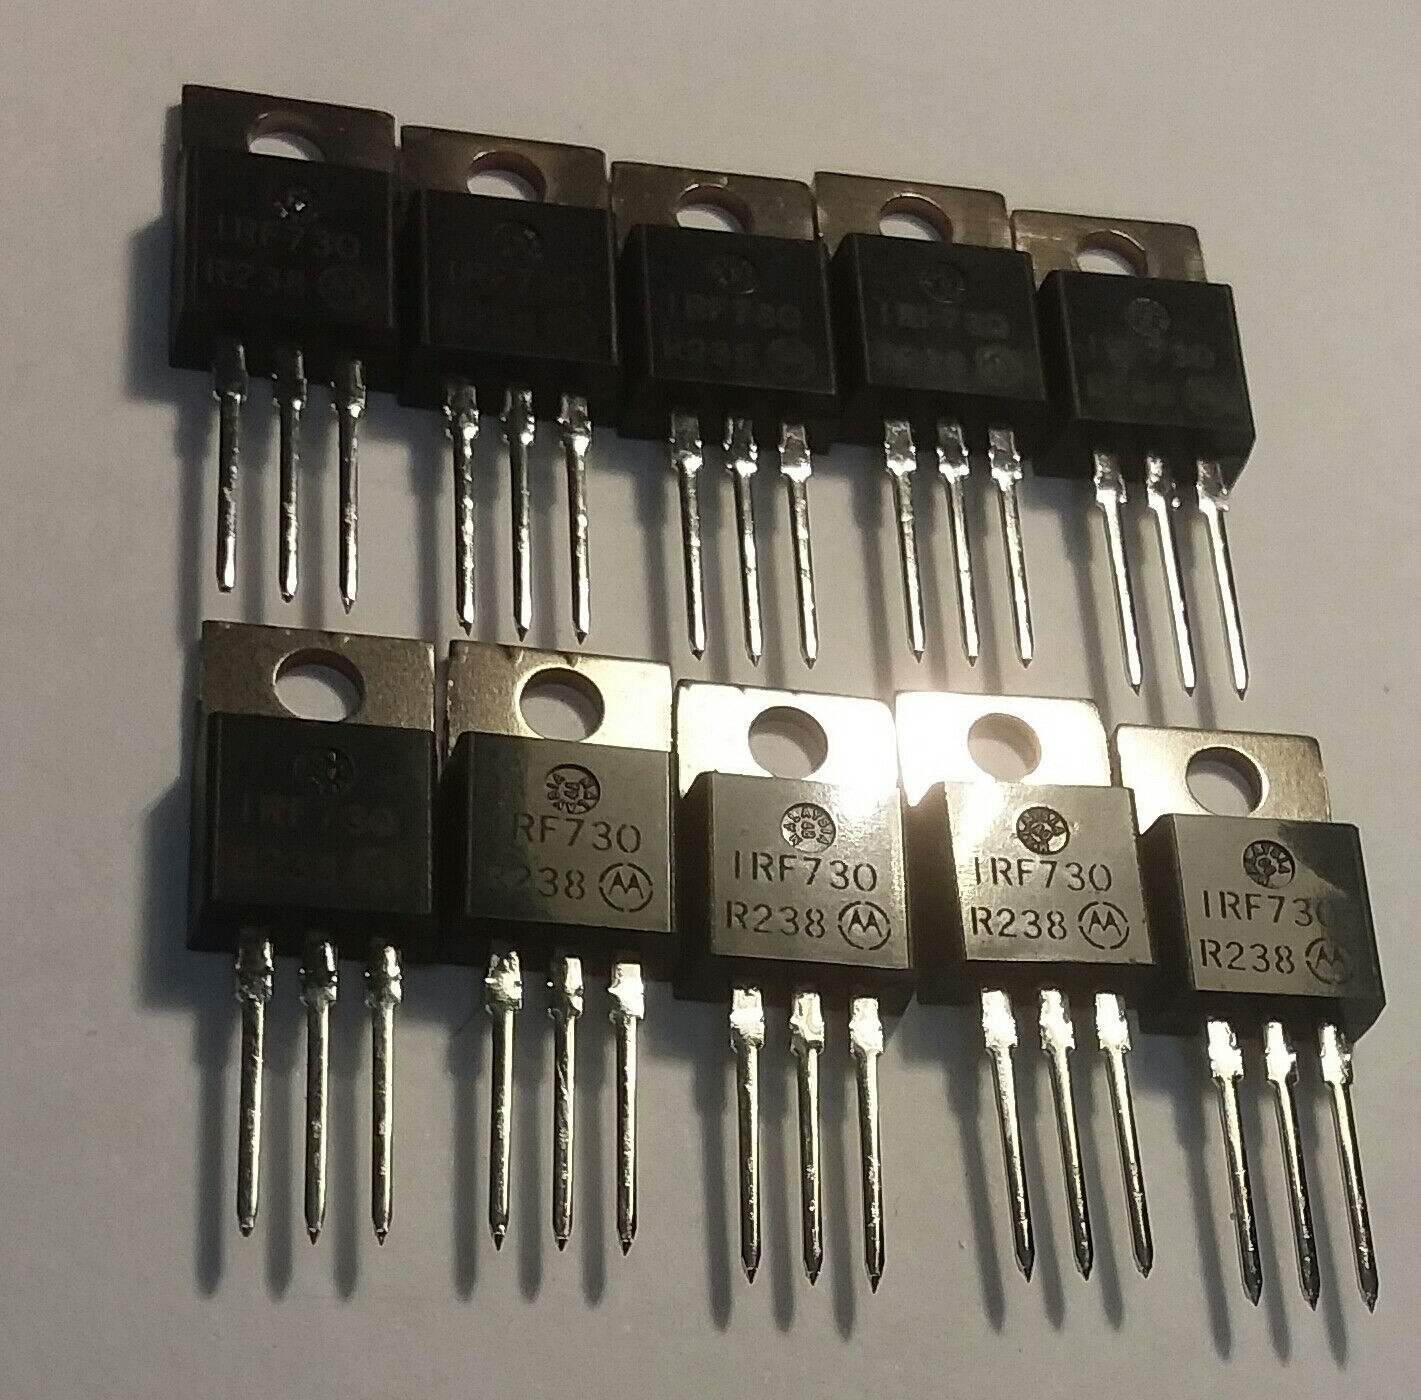 MOTOROLA IRF730 N-CHANNEL MOSFET (10/LOT) 400V 5.5A TO-220 BUY 2 LOTS 1 lot free